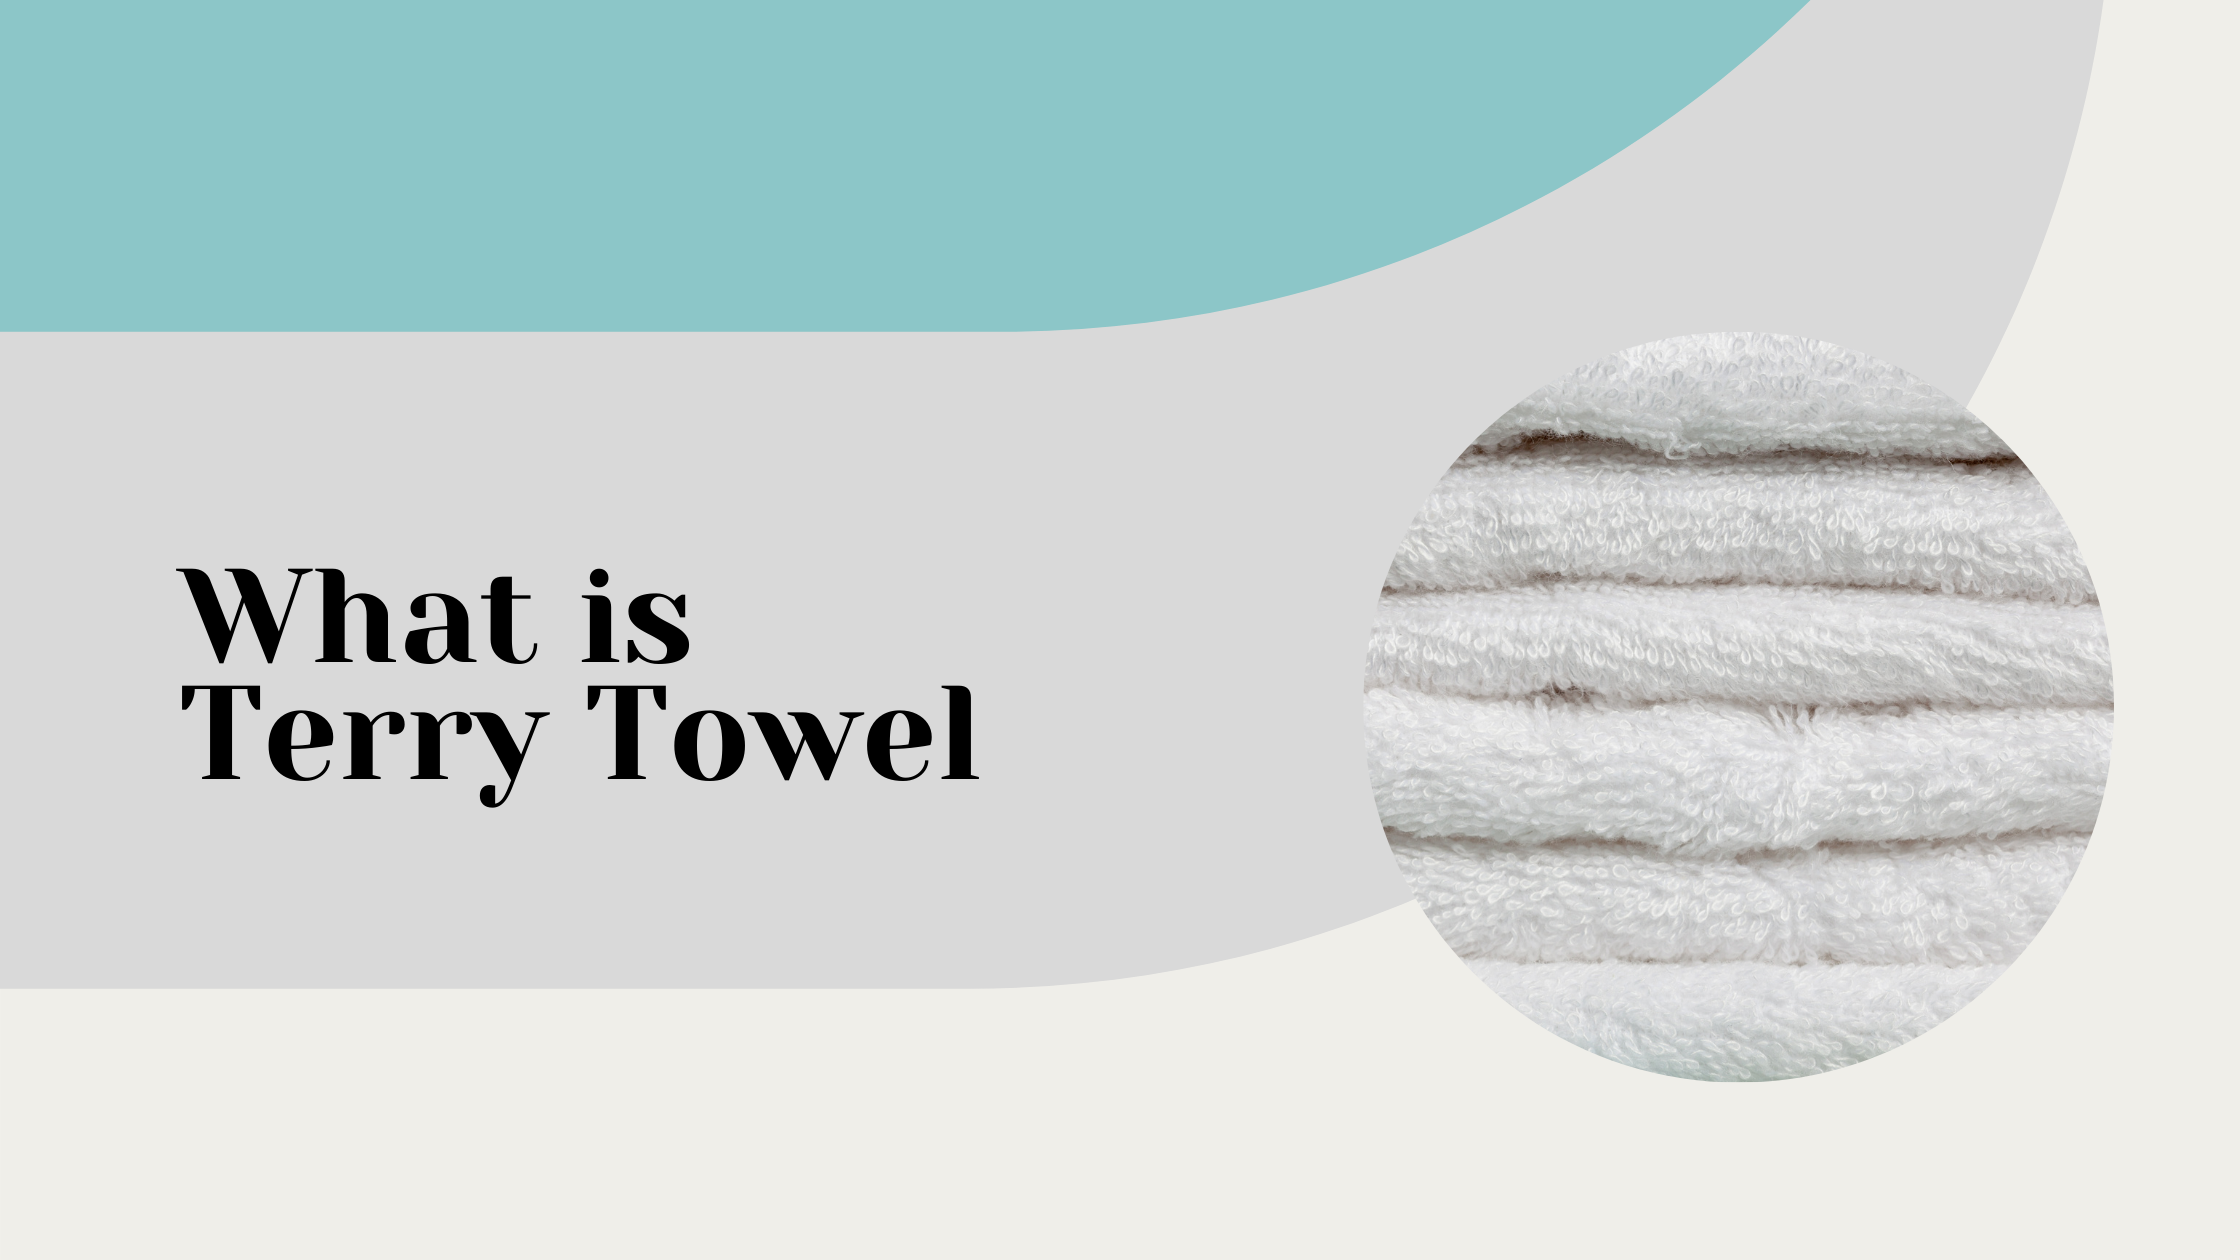 What is Terry Towel